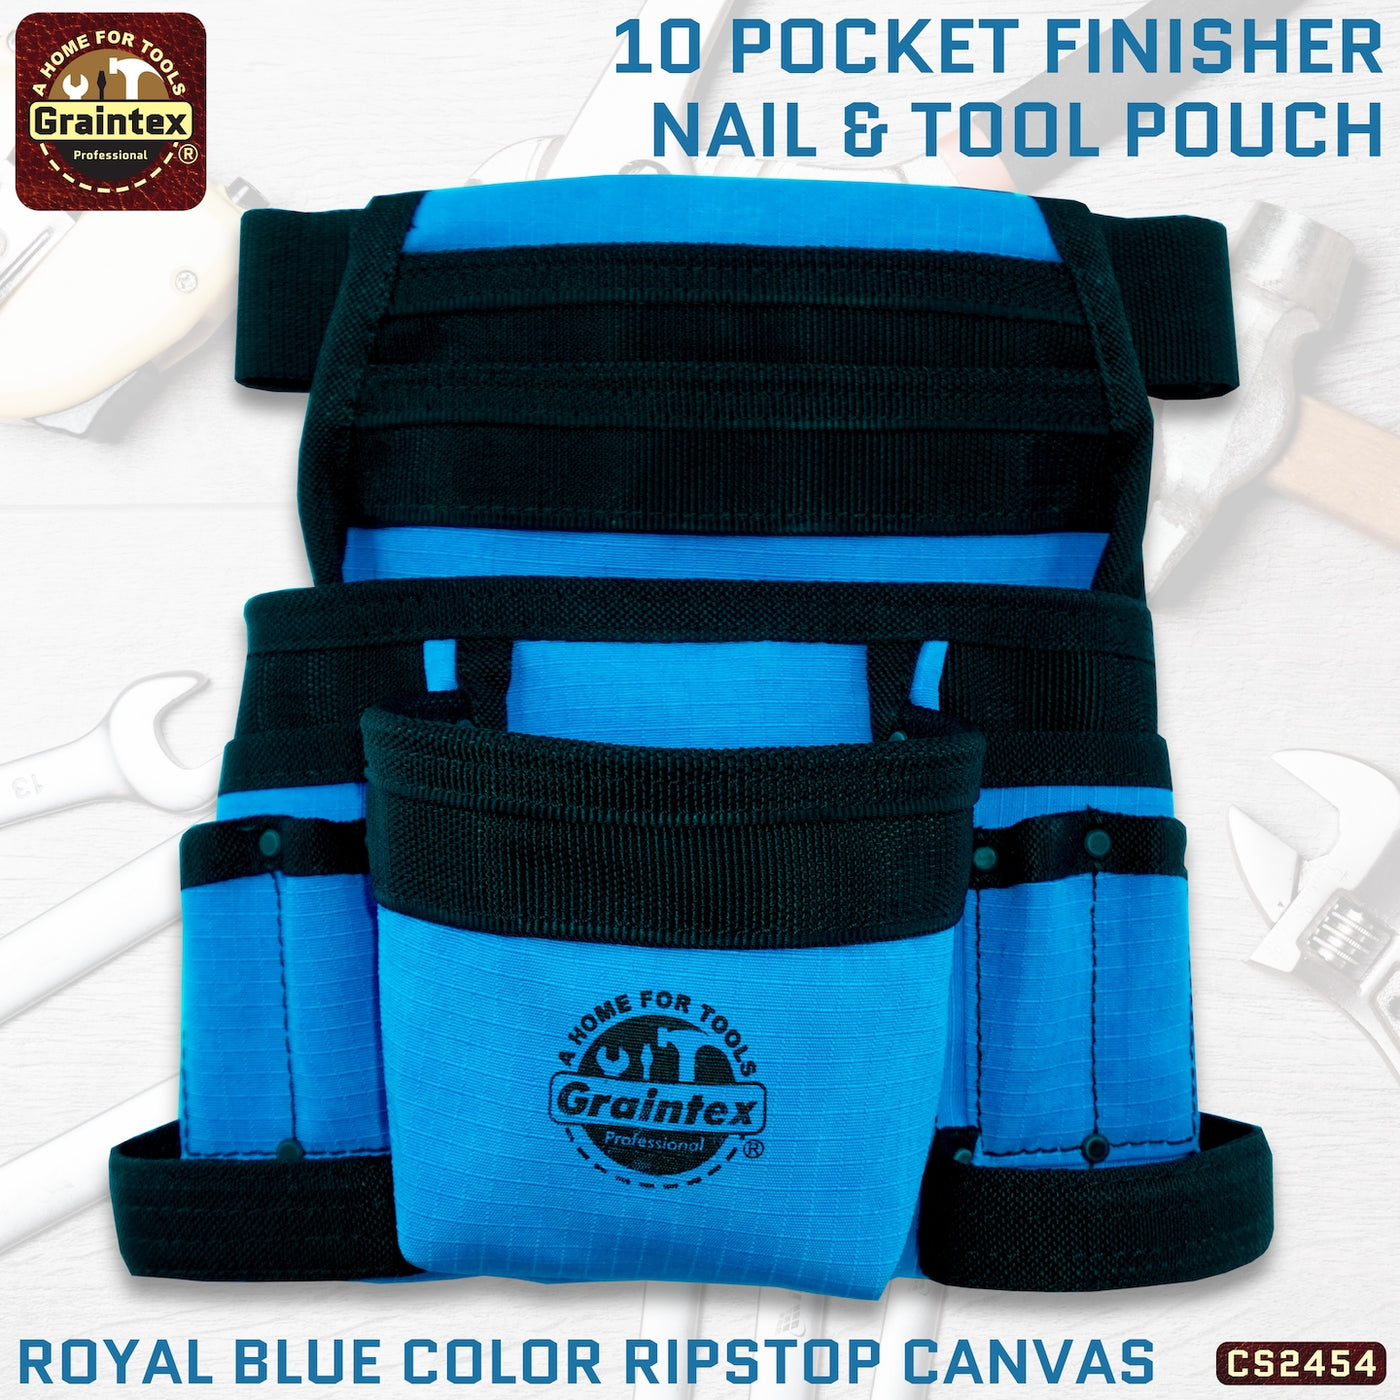 CS2454 :: 10 Pocket Finisher Nail & Tool Pouch Royal Blue Color Ripstop Canvas with 2” Webbing Belt